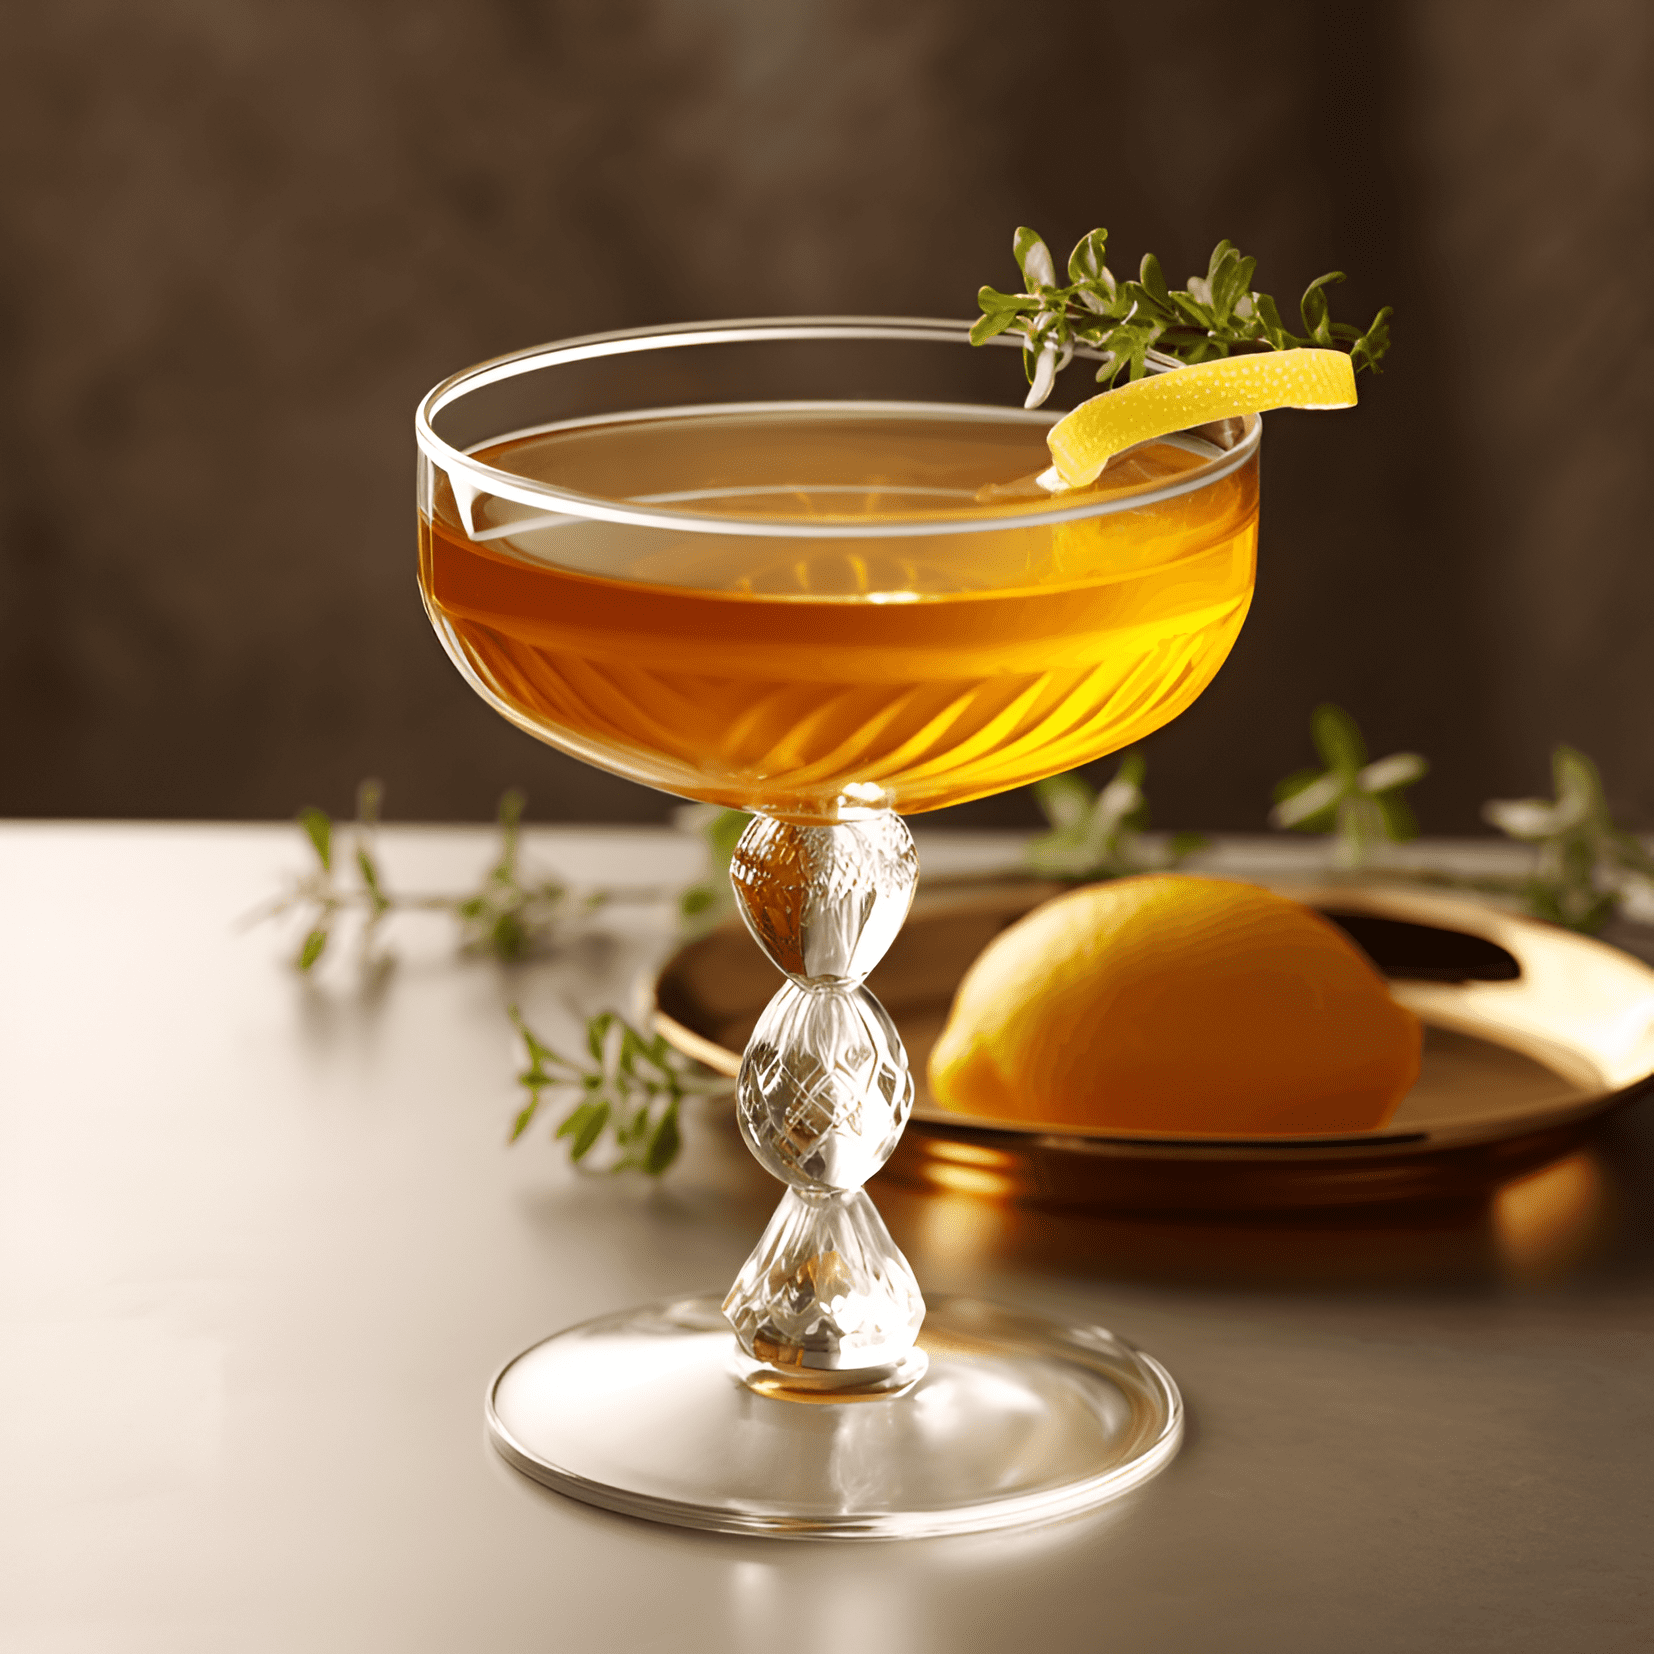 Japanese Cocktail Recipe - The Japanese Cocktail has a delicate, slightly sweet and nutty flavor profile. The combination of orgeat syrup and cognac creates a smooth, velvety texture, while the bitters add a subtle hint of spice and complexity.